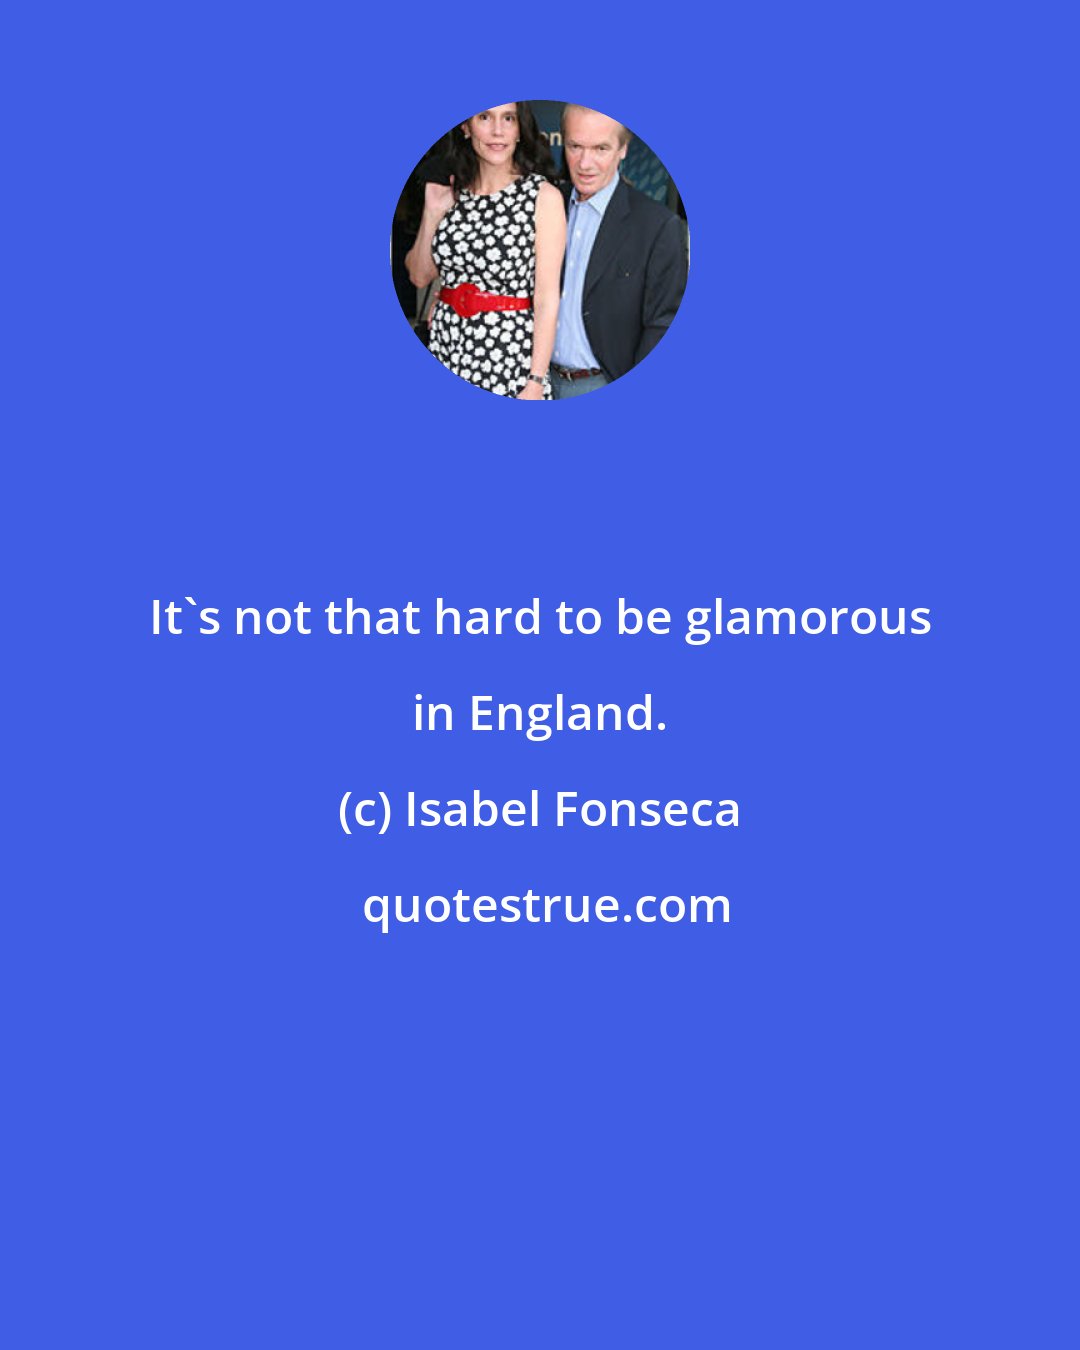 Isabel Fonseca: It's not that hard to be glamorous in England.